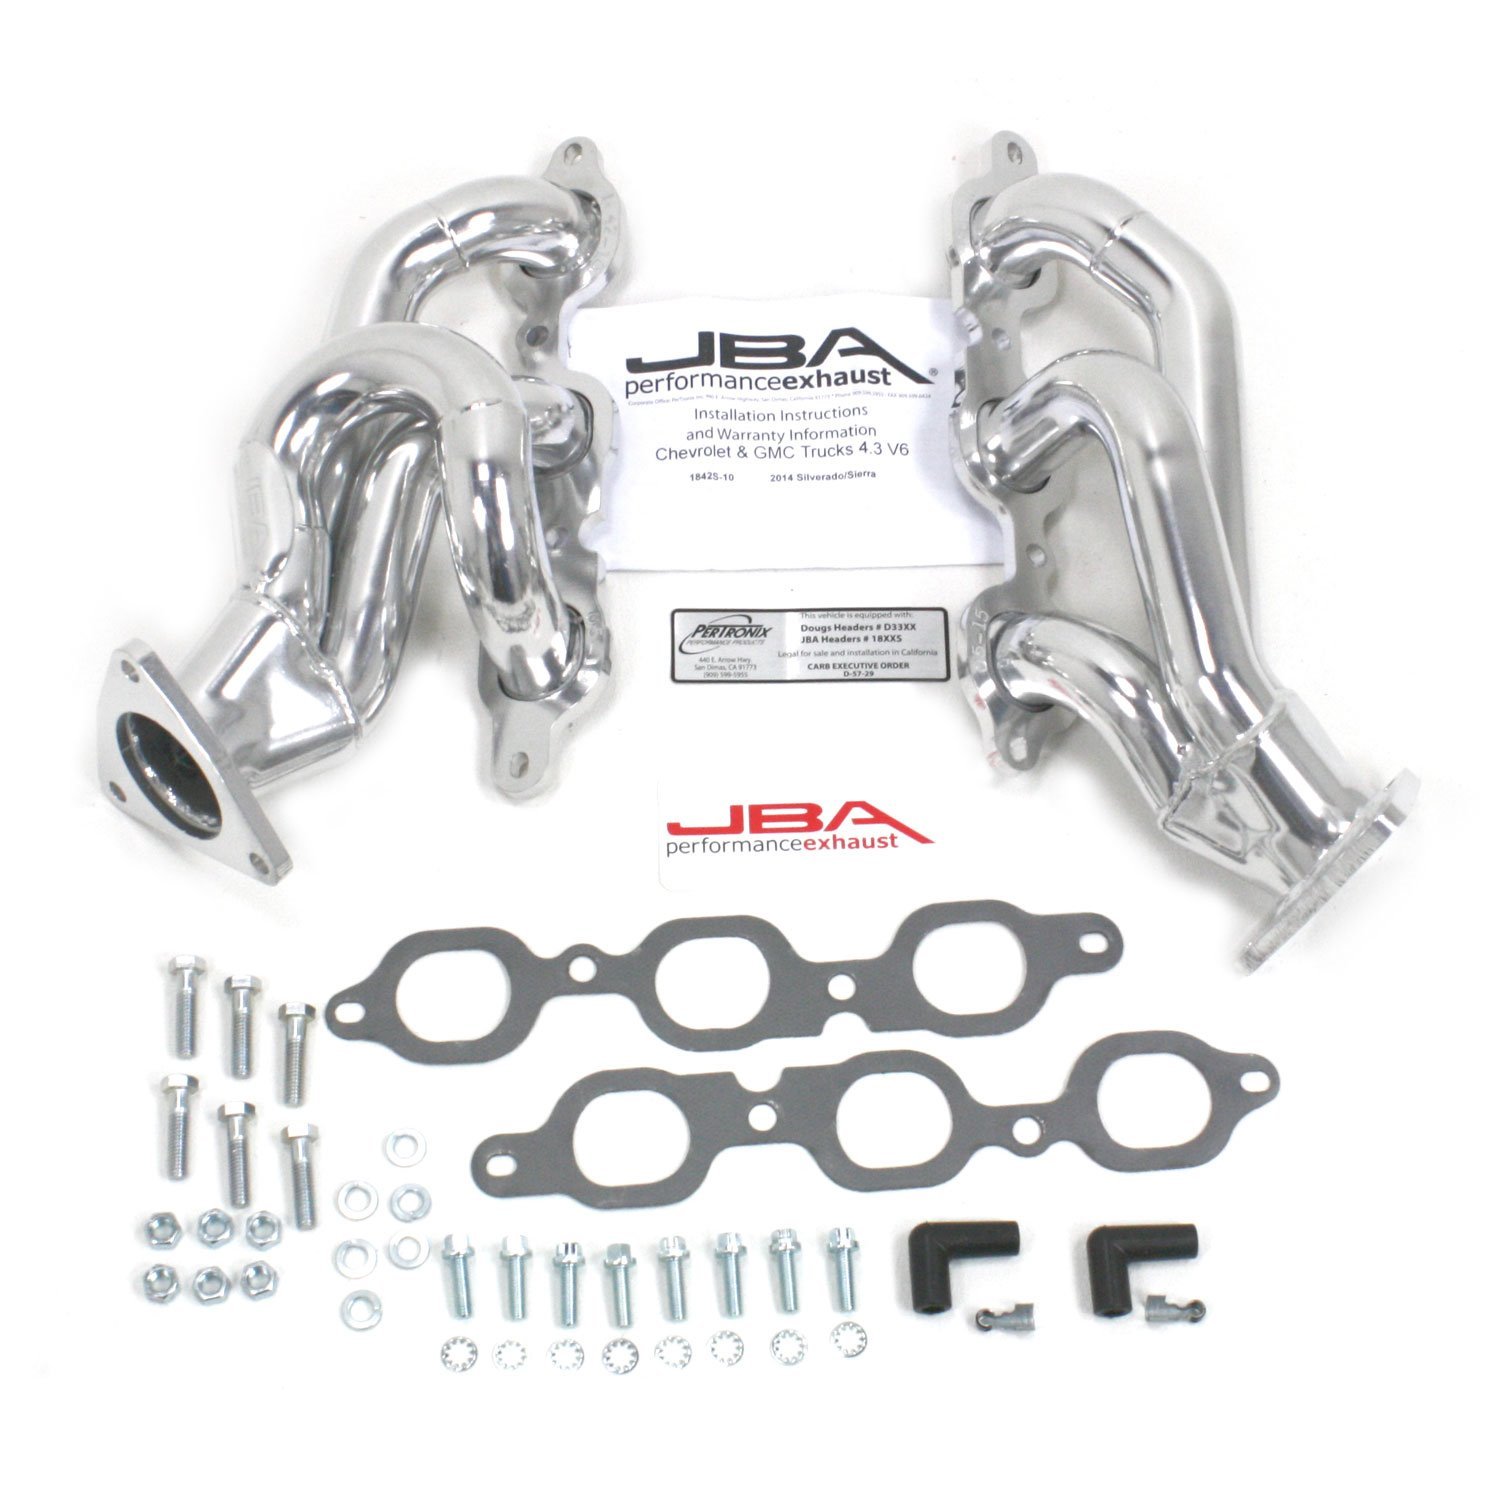 Performance Exhaust 1842S-10JS Header Shorty Stainless Steel 2014-2016 GM Truck 4.3L V6 Silver Ceramic